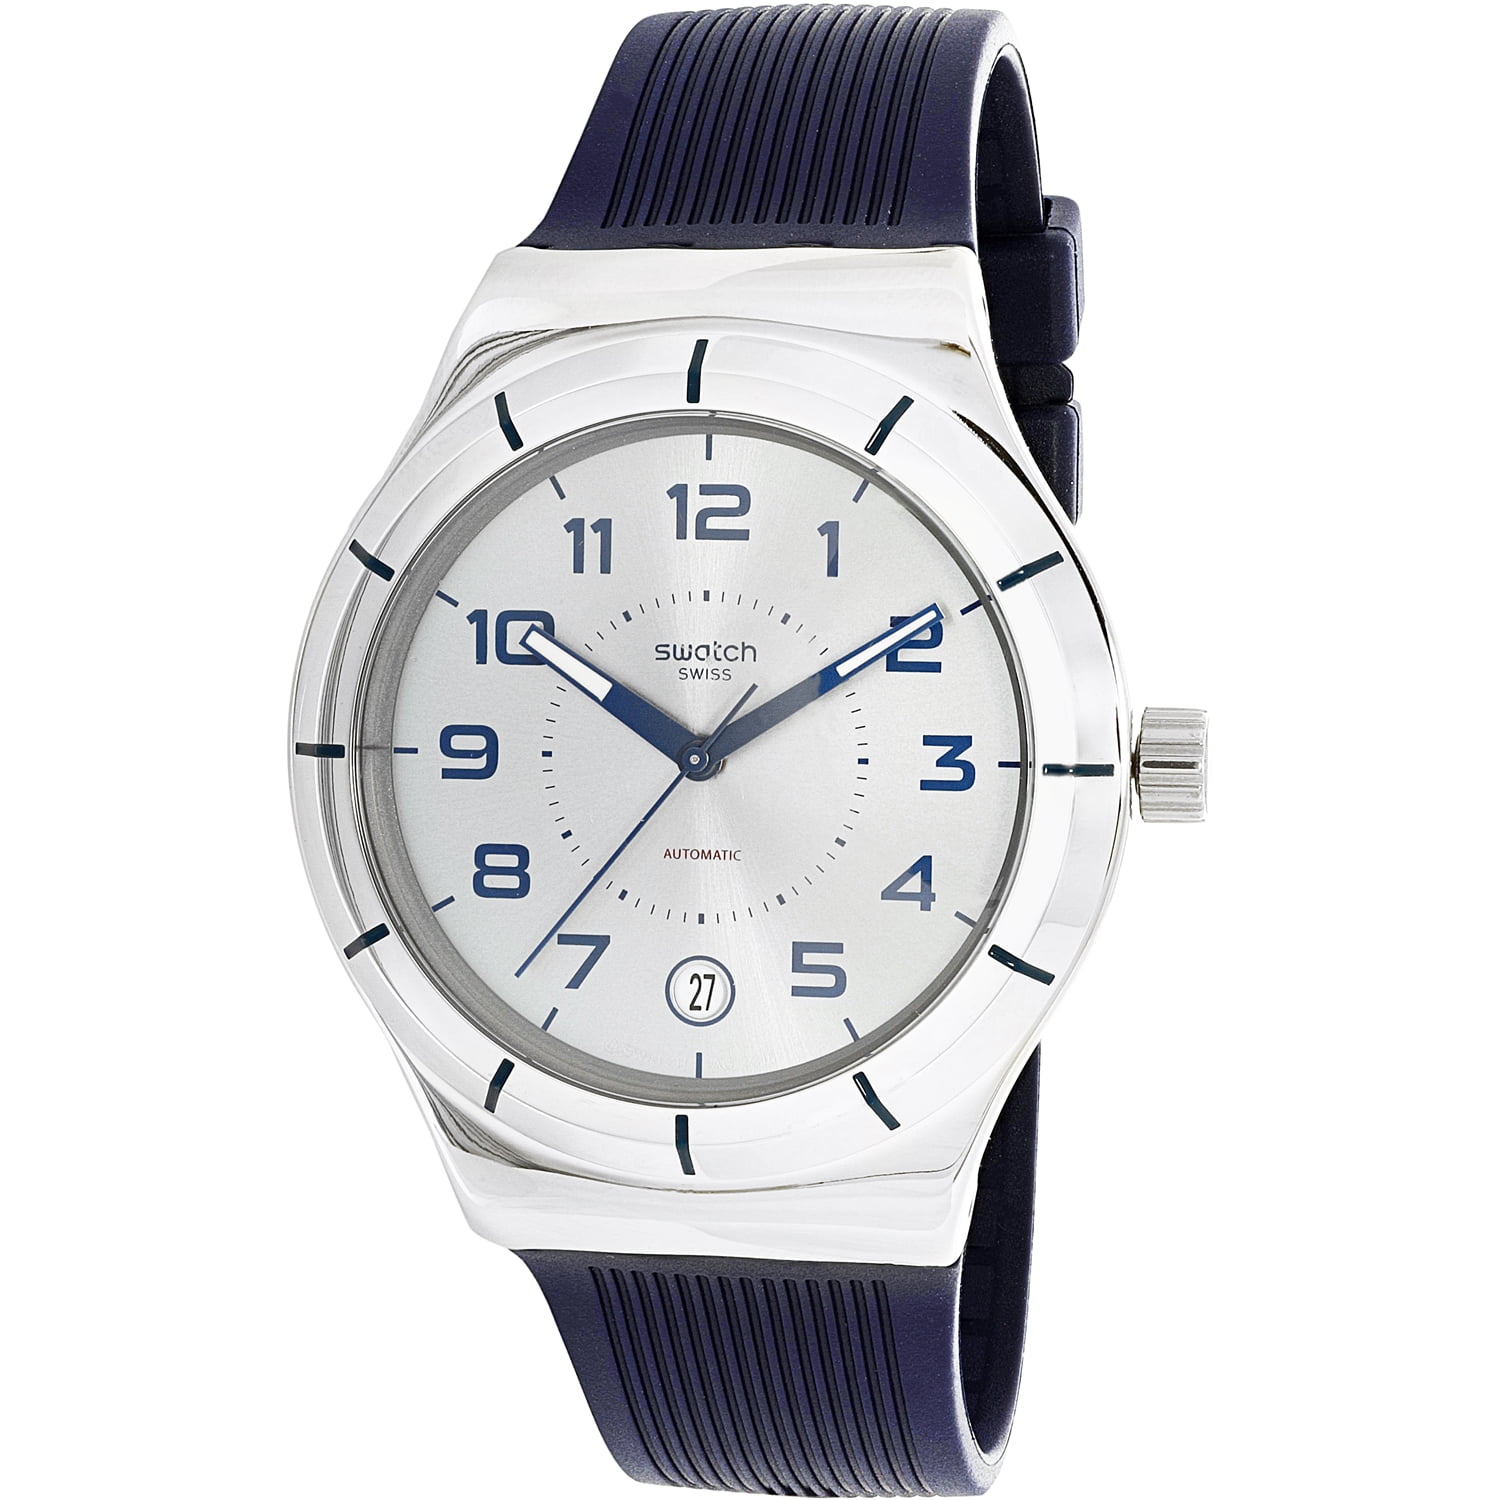 Swatch - Swatch Men's Irony YIS409 Blue Rubber Swiss Automatic Fashion